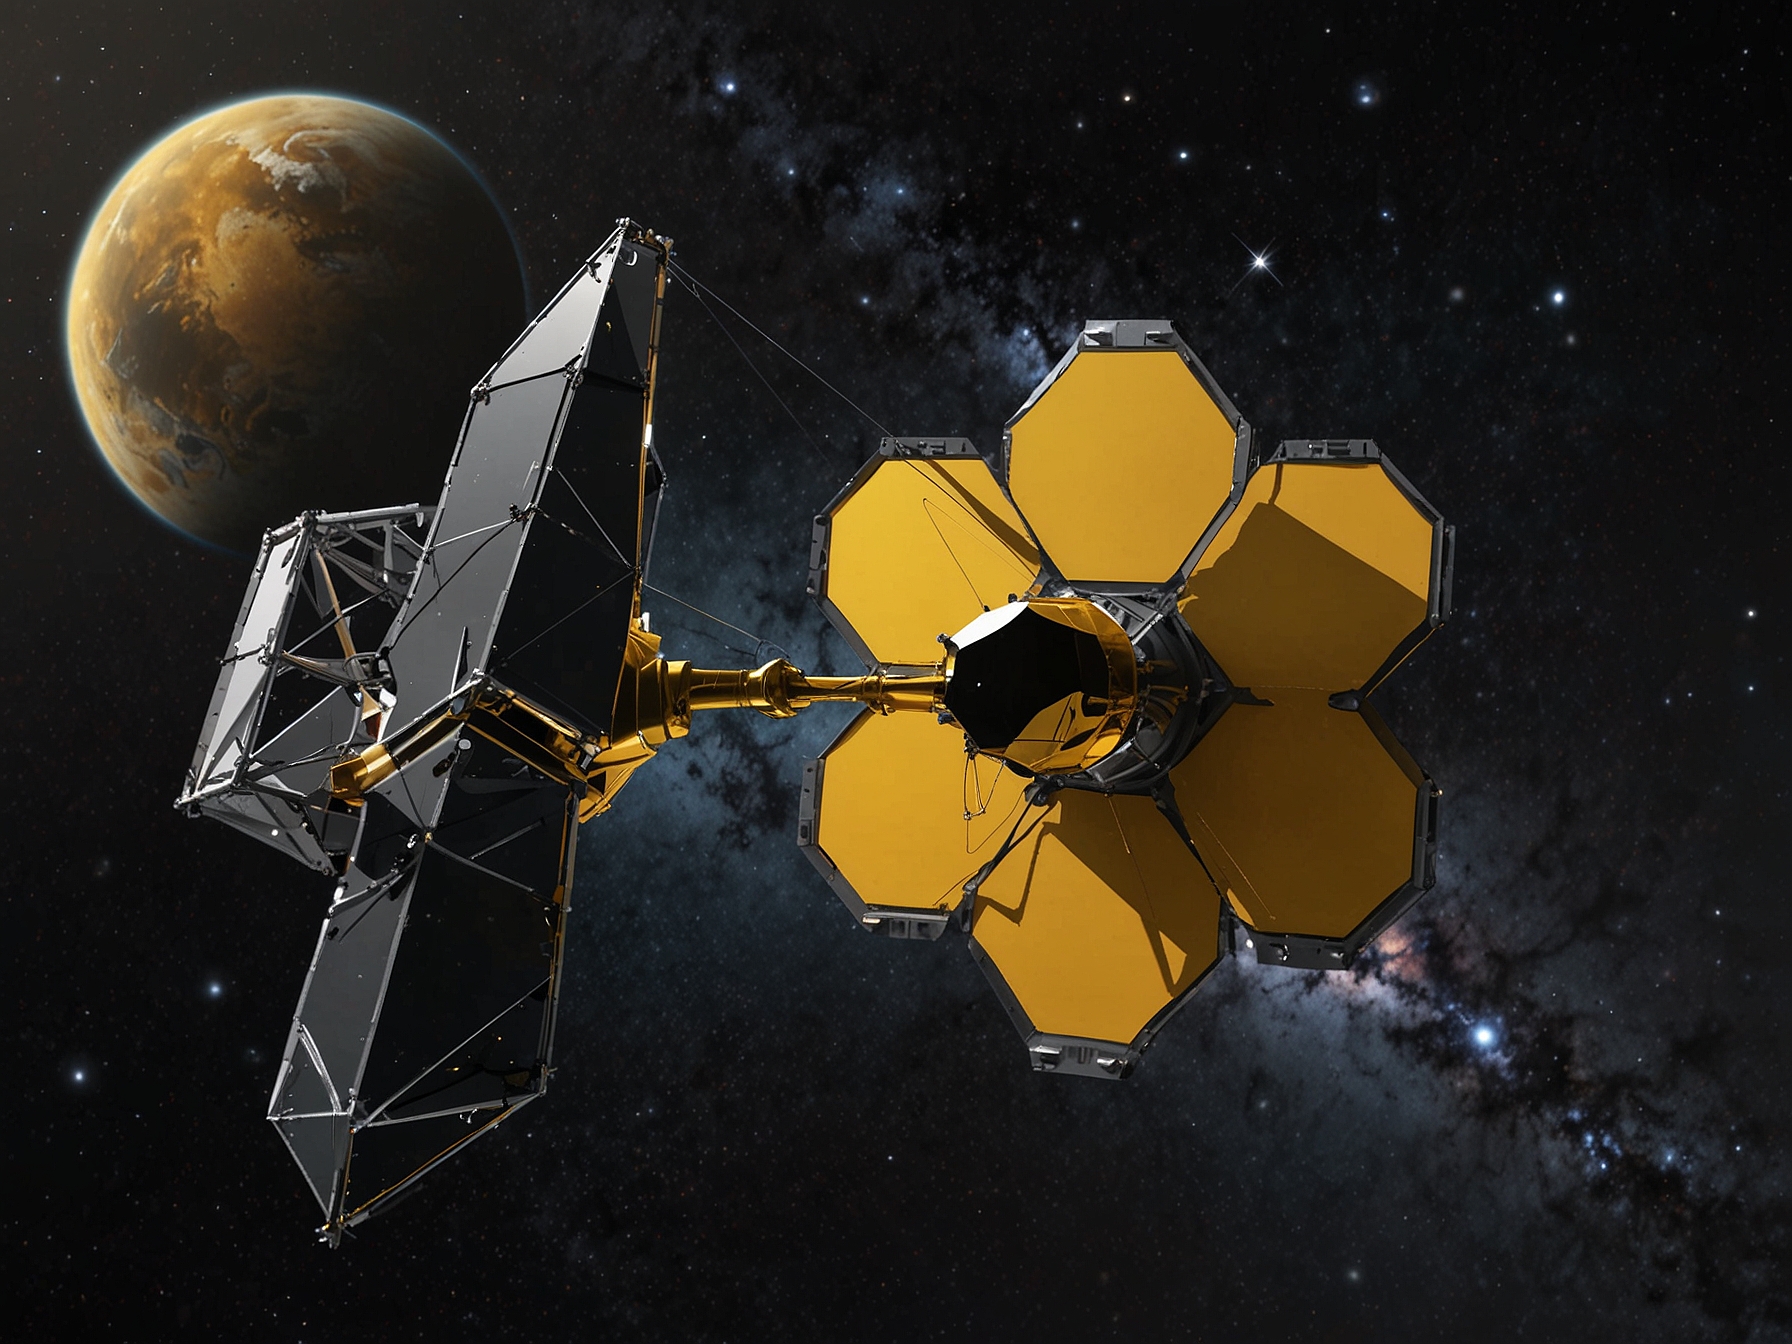 An illustration depicting the James Webb Space Telescope in space, highlighting its advanced technology and contributions to both space exploration and Earth-based technological advancements.